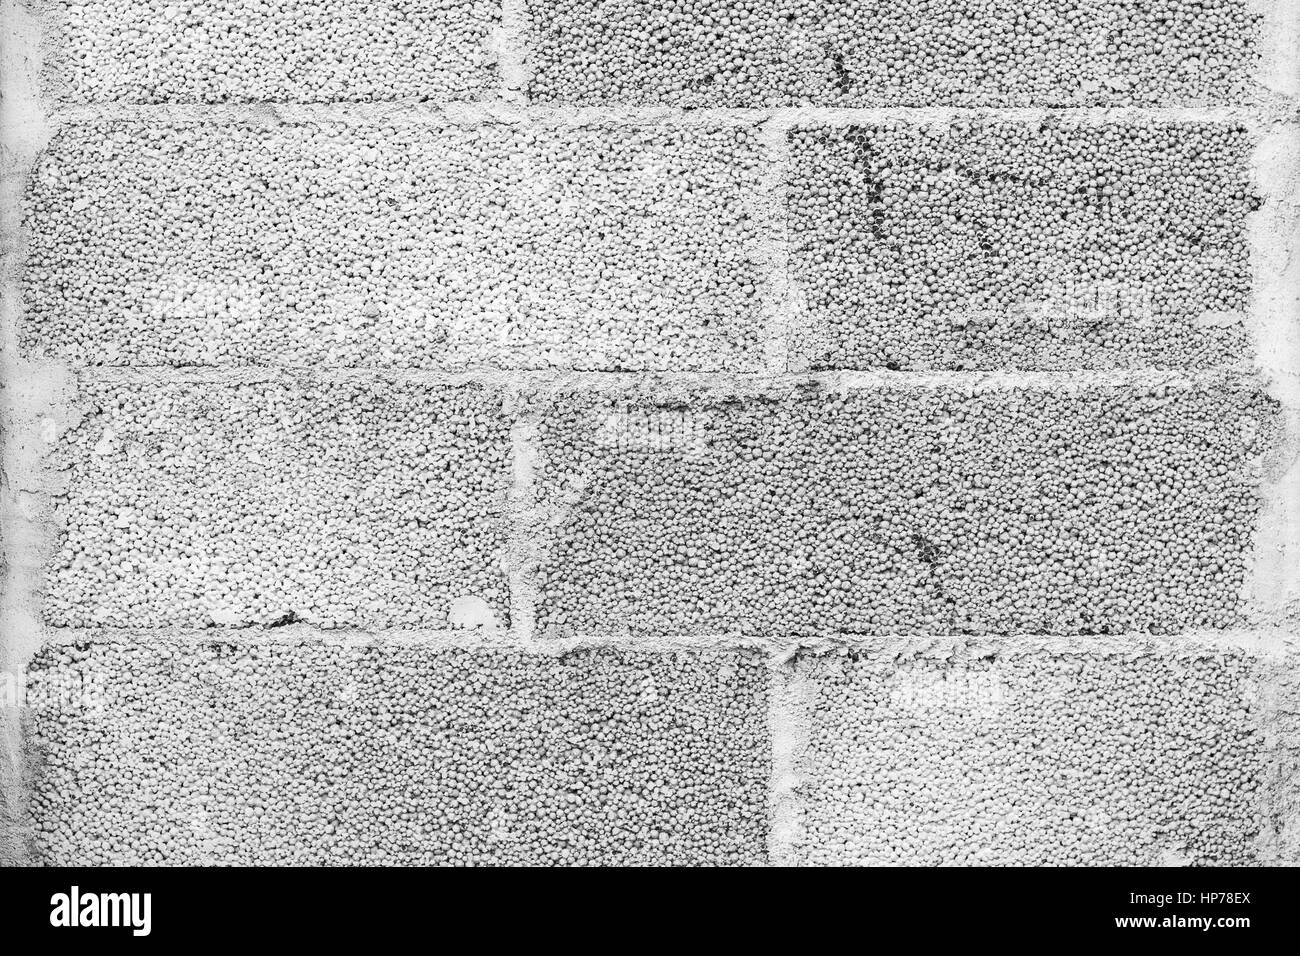 Close-up of a concrete block wall texture in black&white. Stock Photo